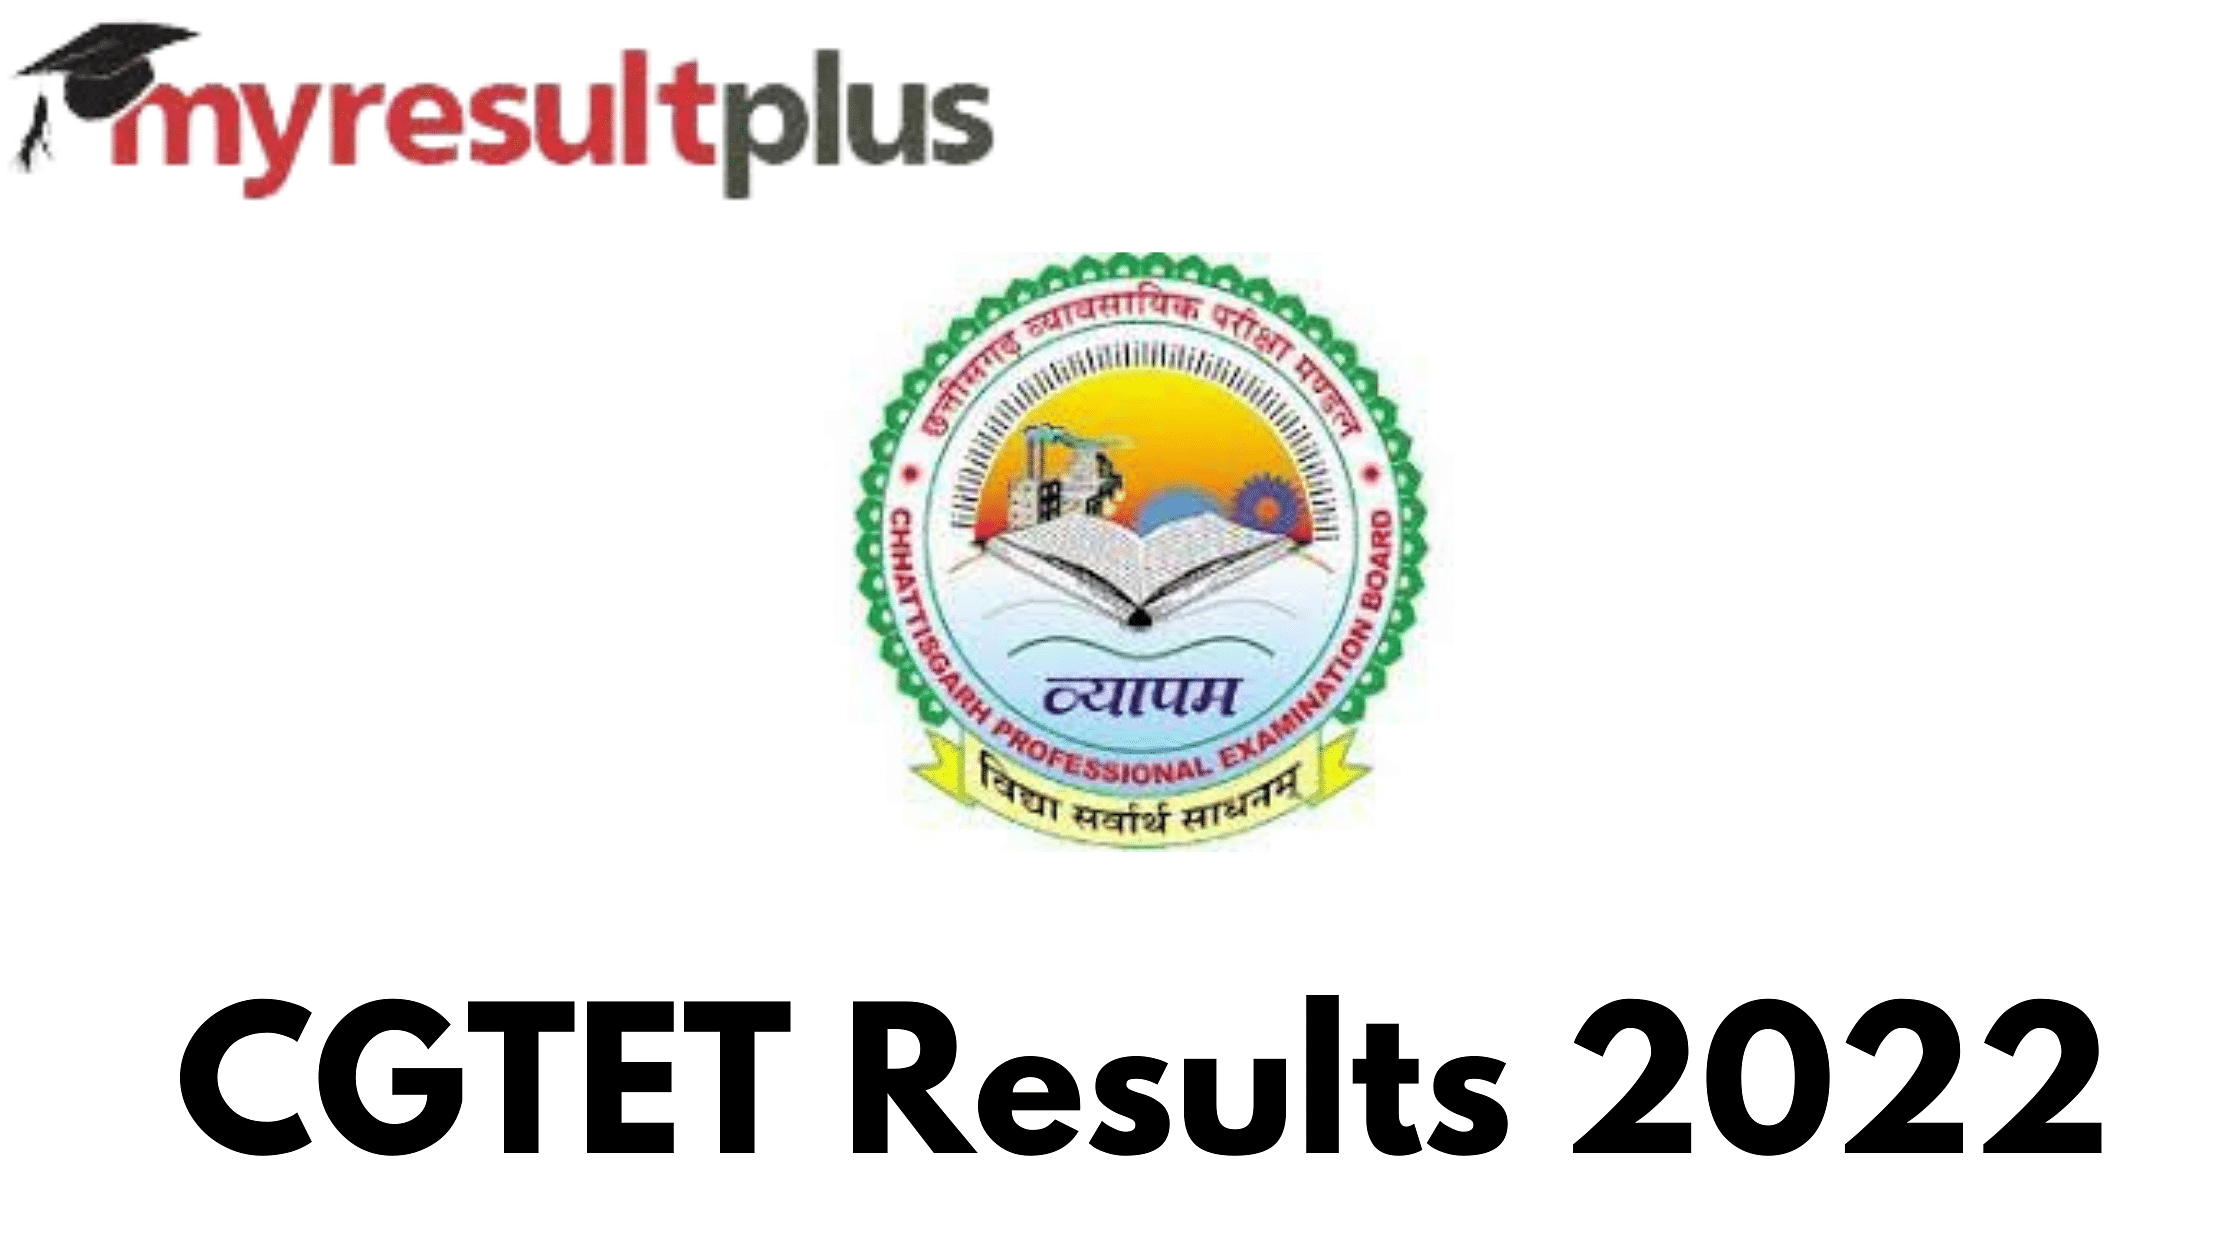 CGTET Results 2022 Announced, Know How to Check Here